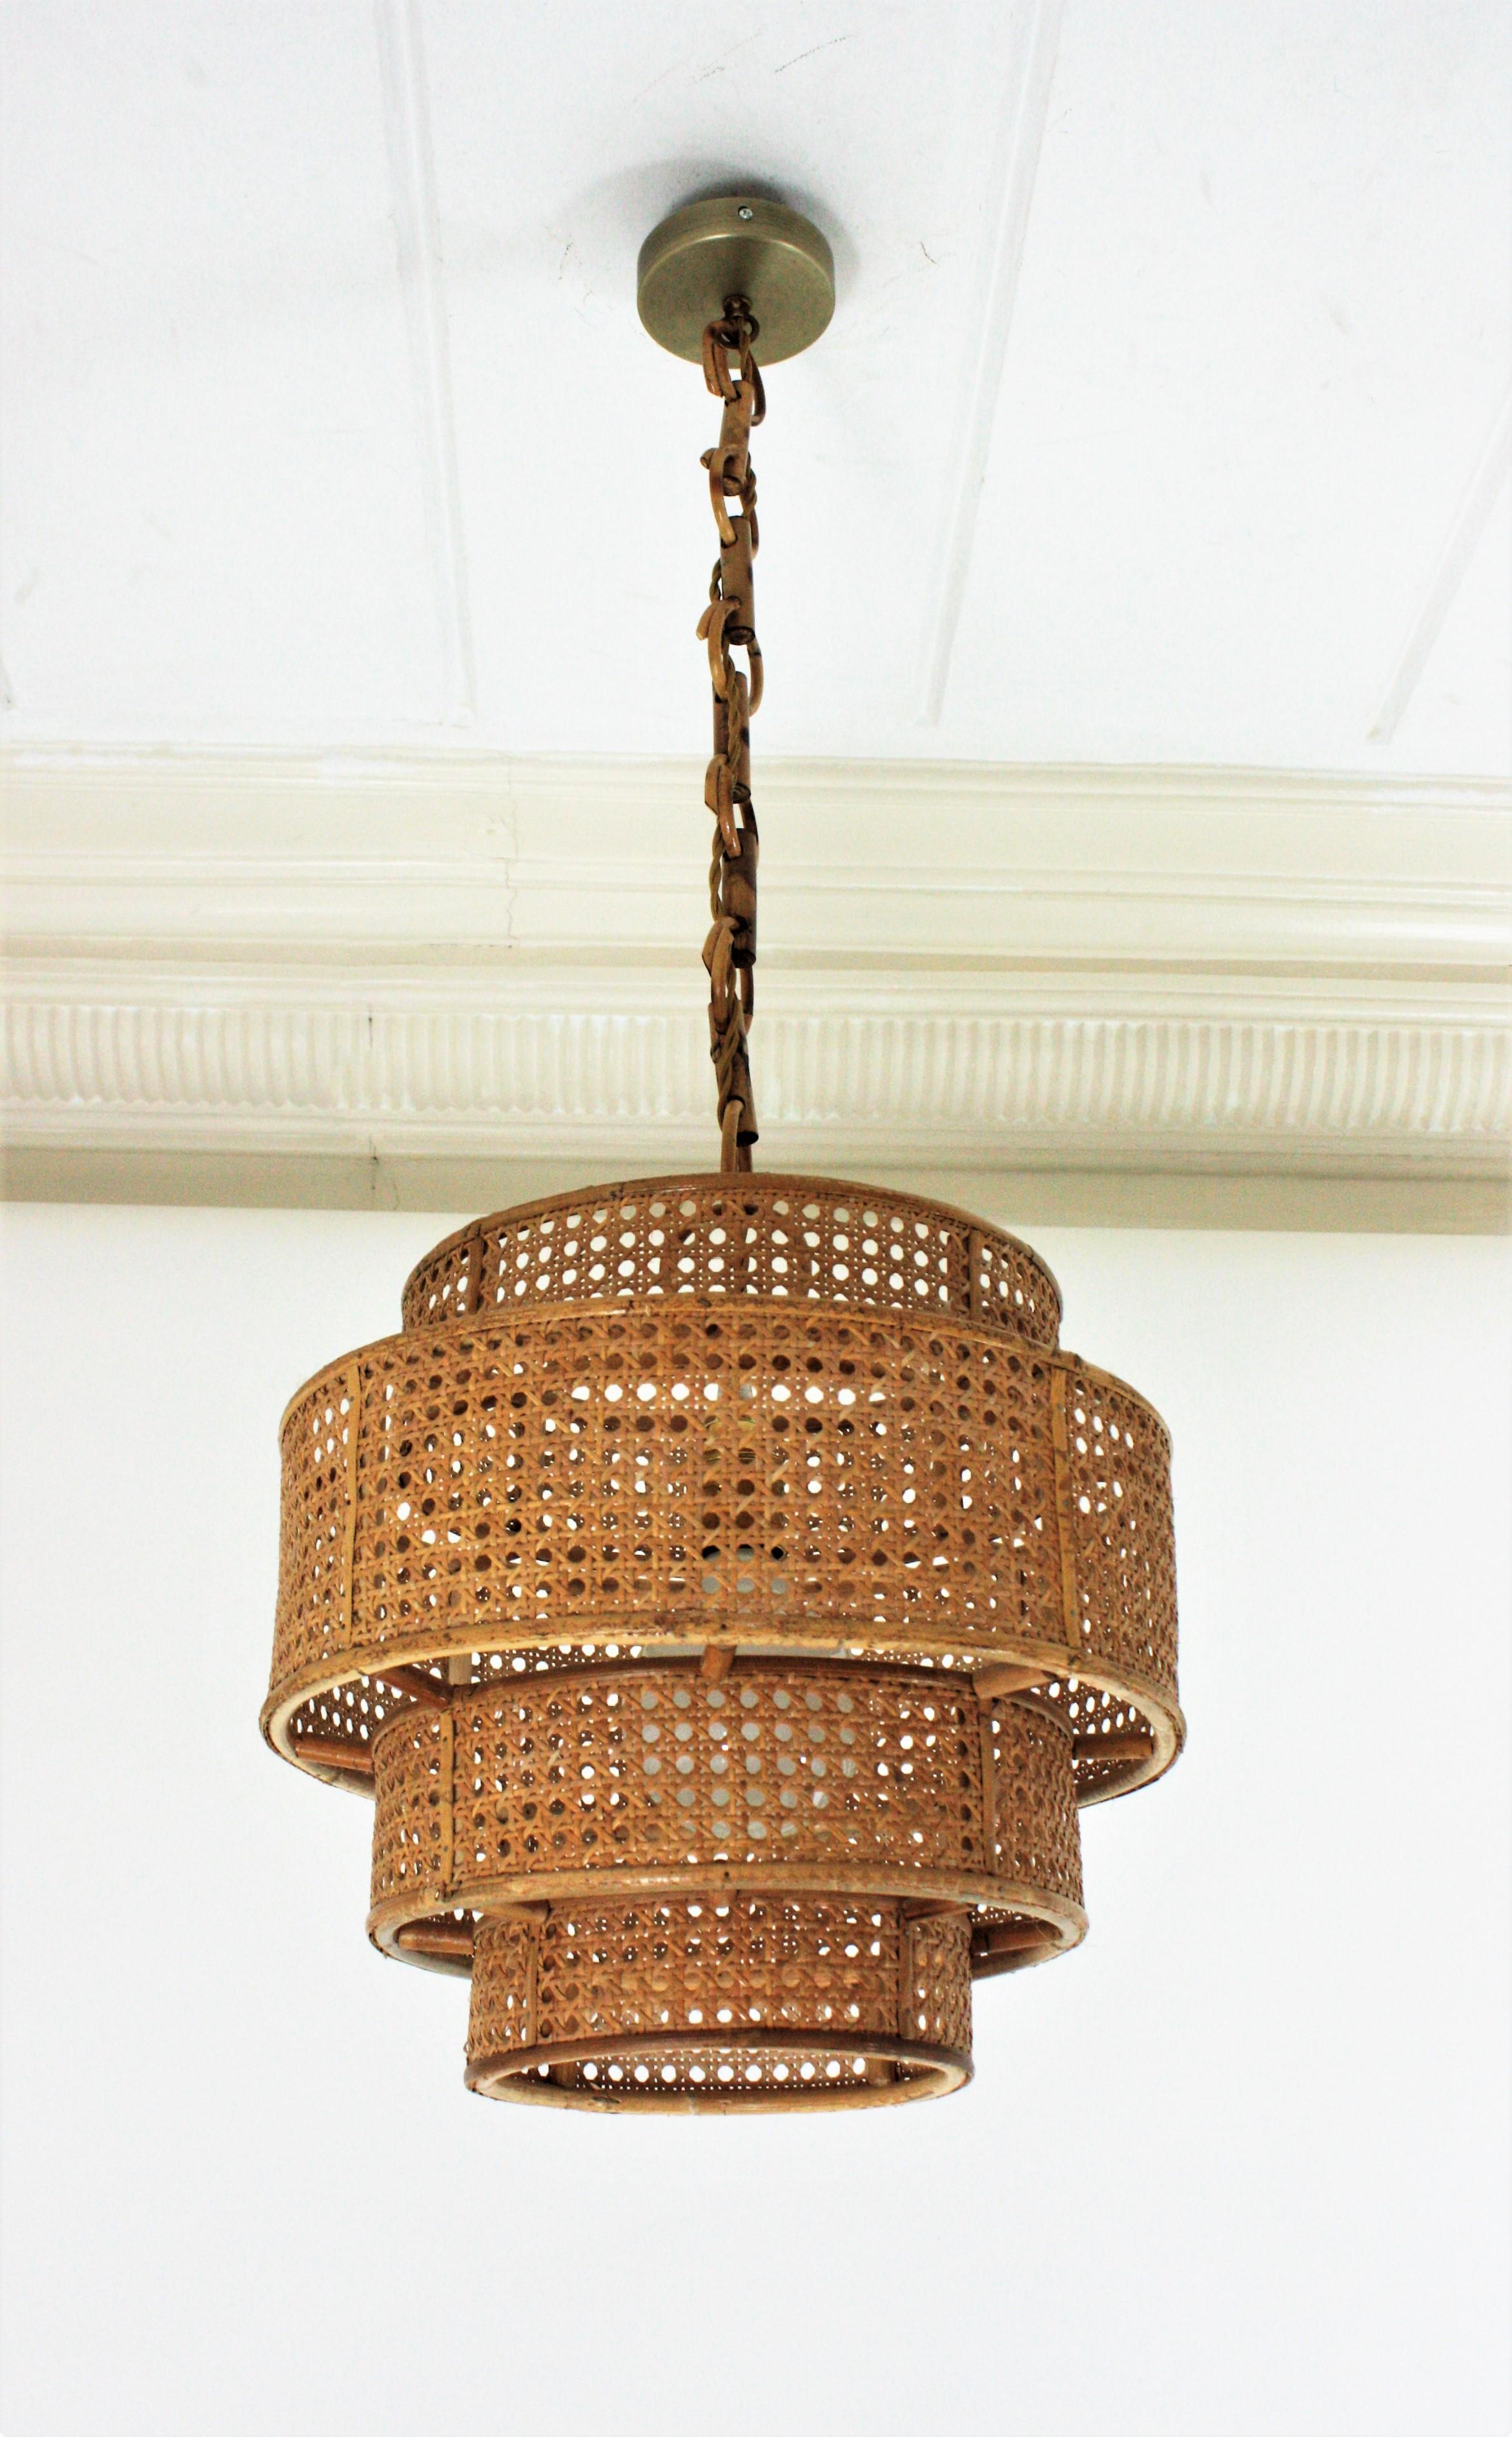  Rattan Wicker Weave Concentric Cylinder Pendant Hanging Light, 1960s For Sale 2